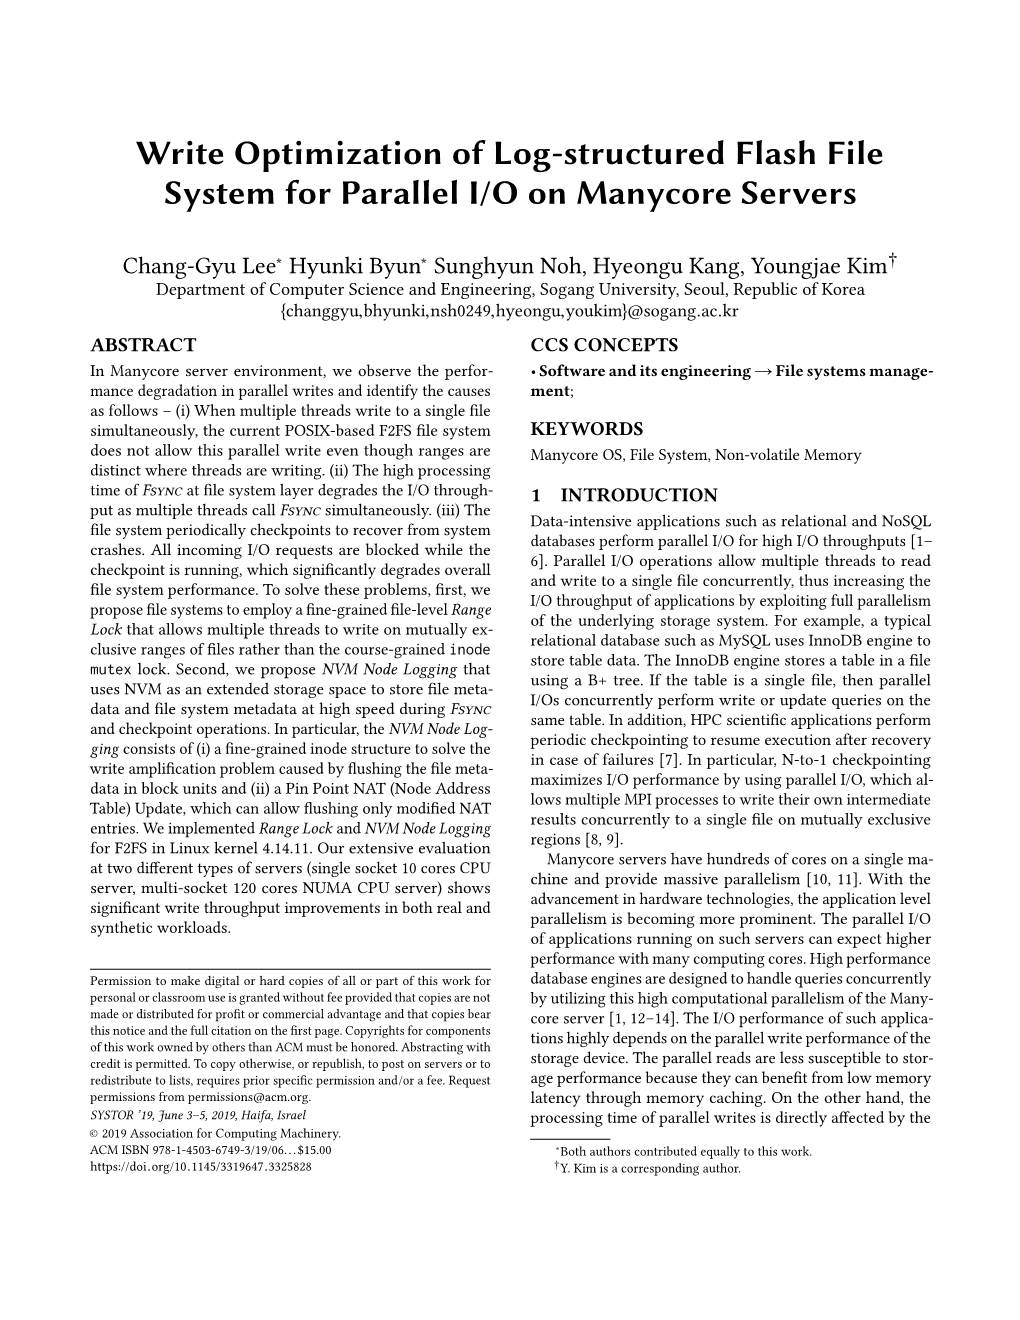 Write Optimization of Log-Structured Flash File System for Parallel I/O on Manycore Servers